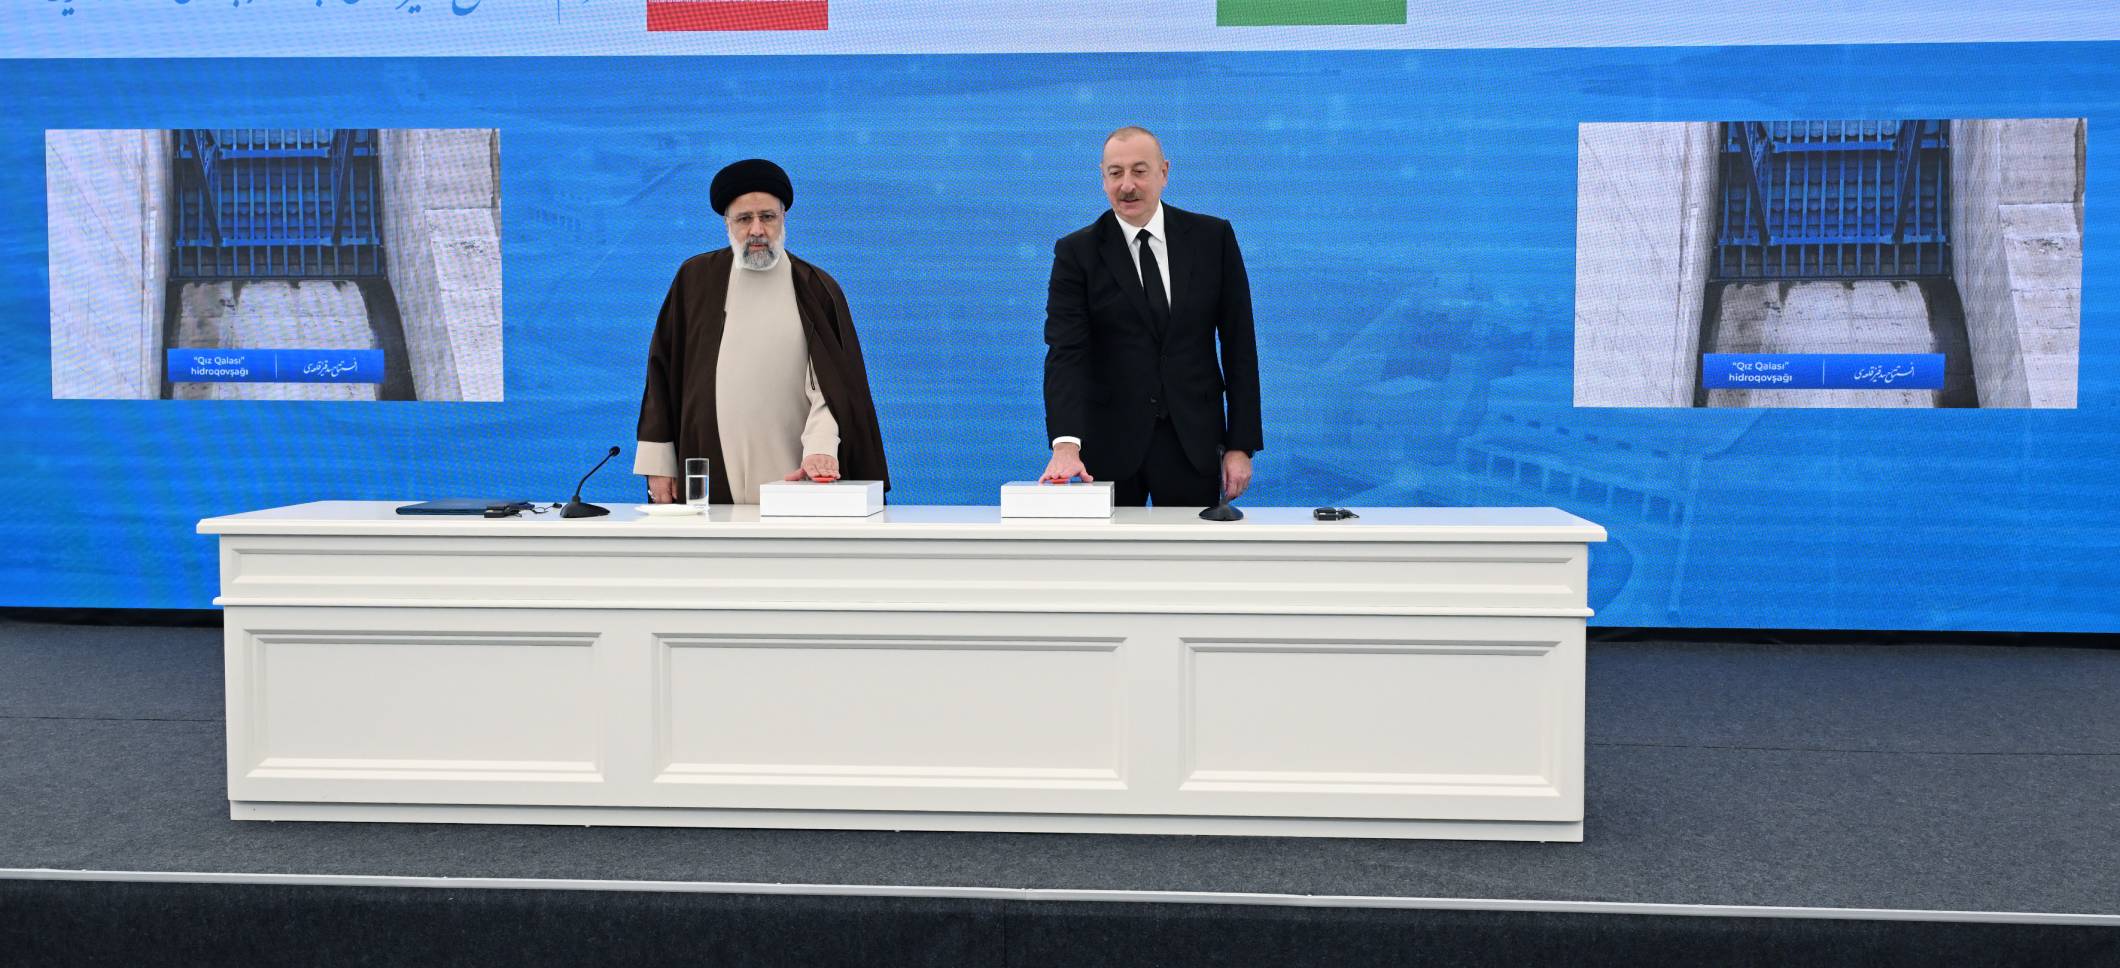 Ceremony to commission "Khudafarin" hydroelectric complex and inaugurate "Giz Galasi" hydroelectric complex got underway with participation of Azerbaijani and Iranian Presidents